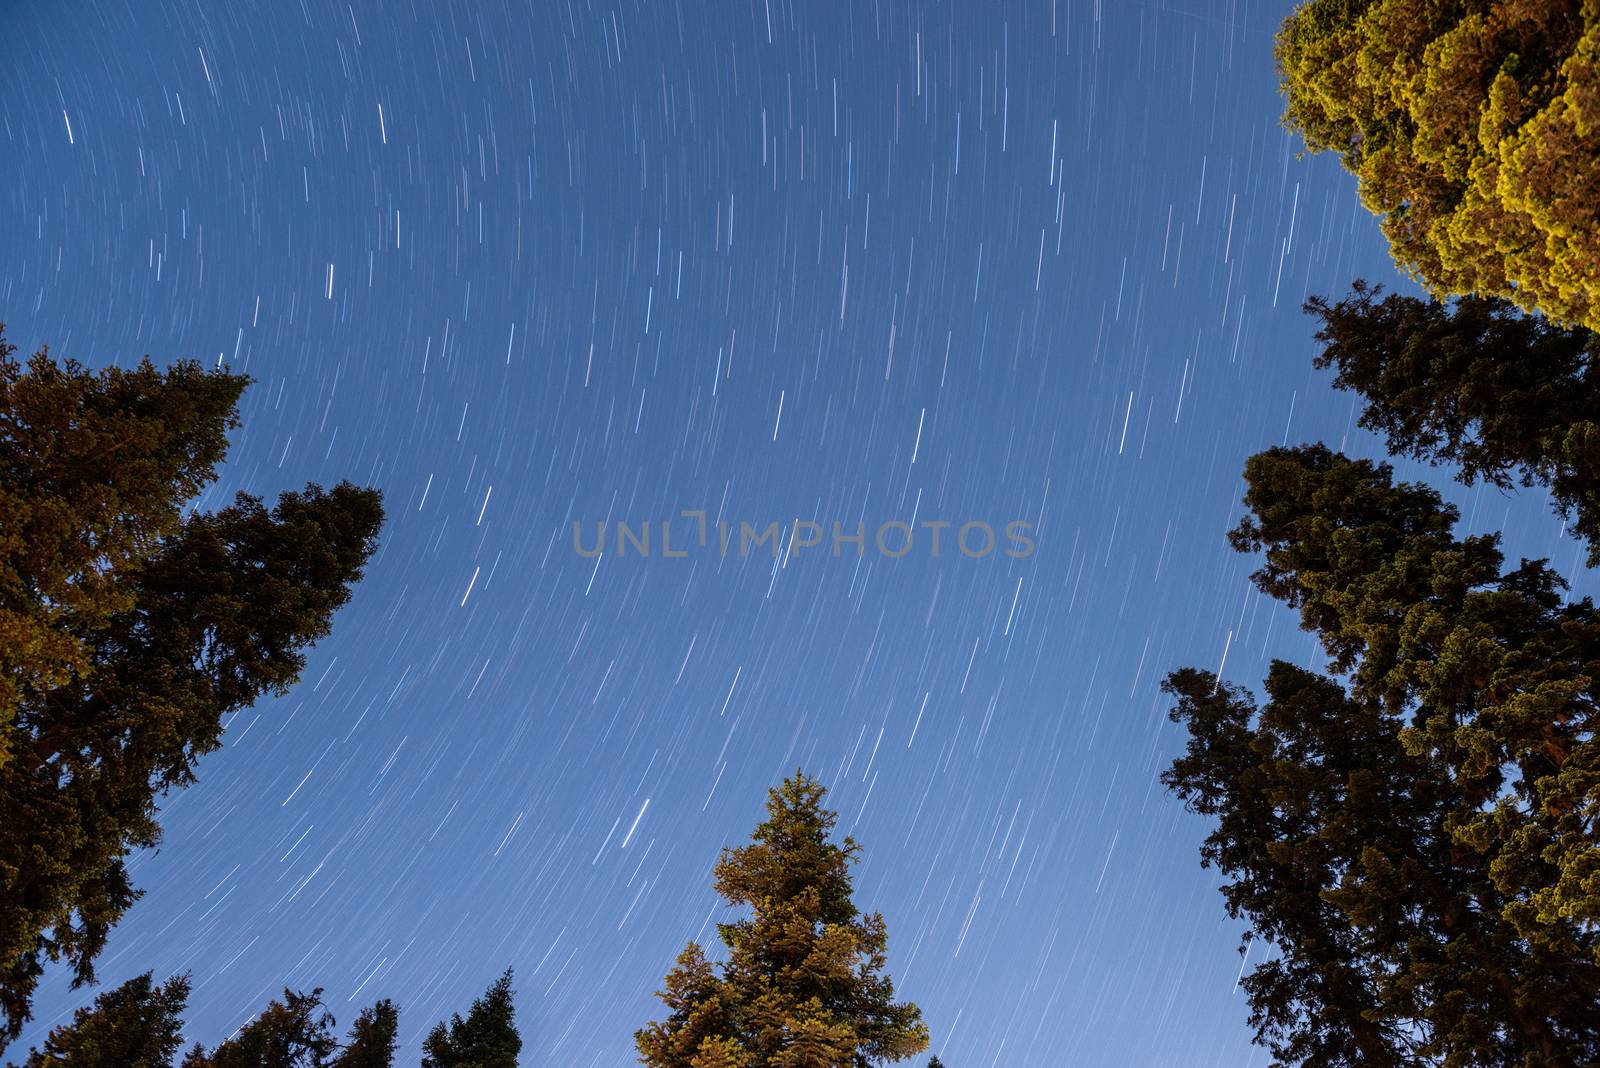 Star trails in Dorst Creek campground in Sequoia National Park, California